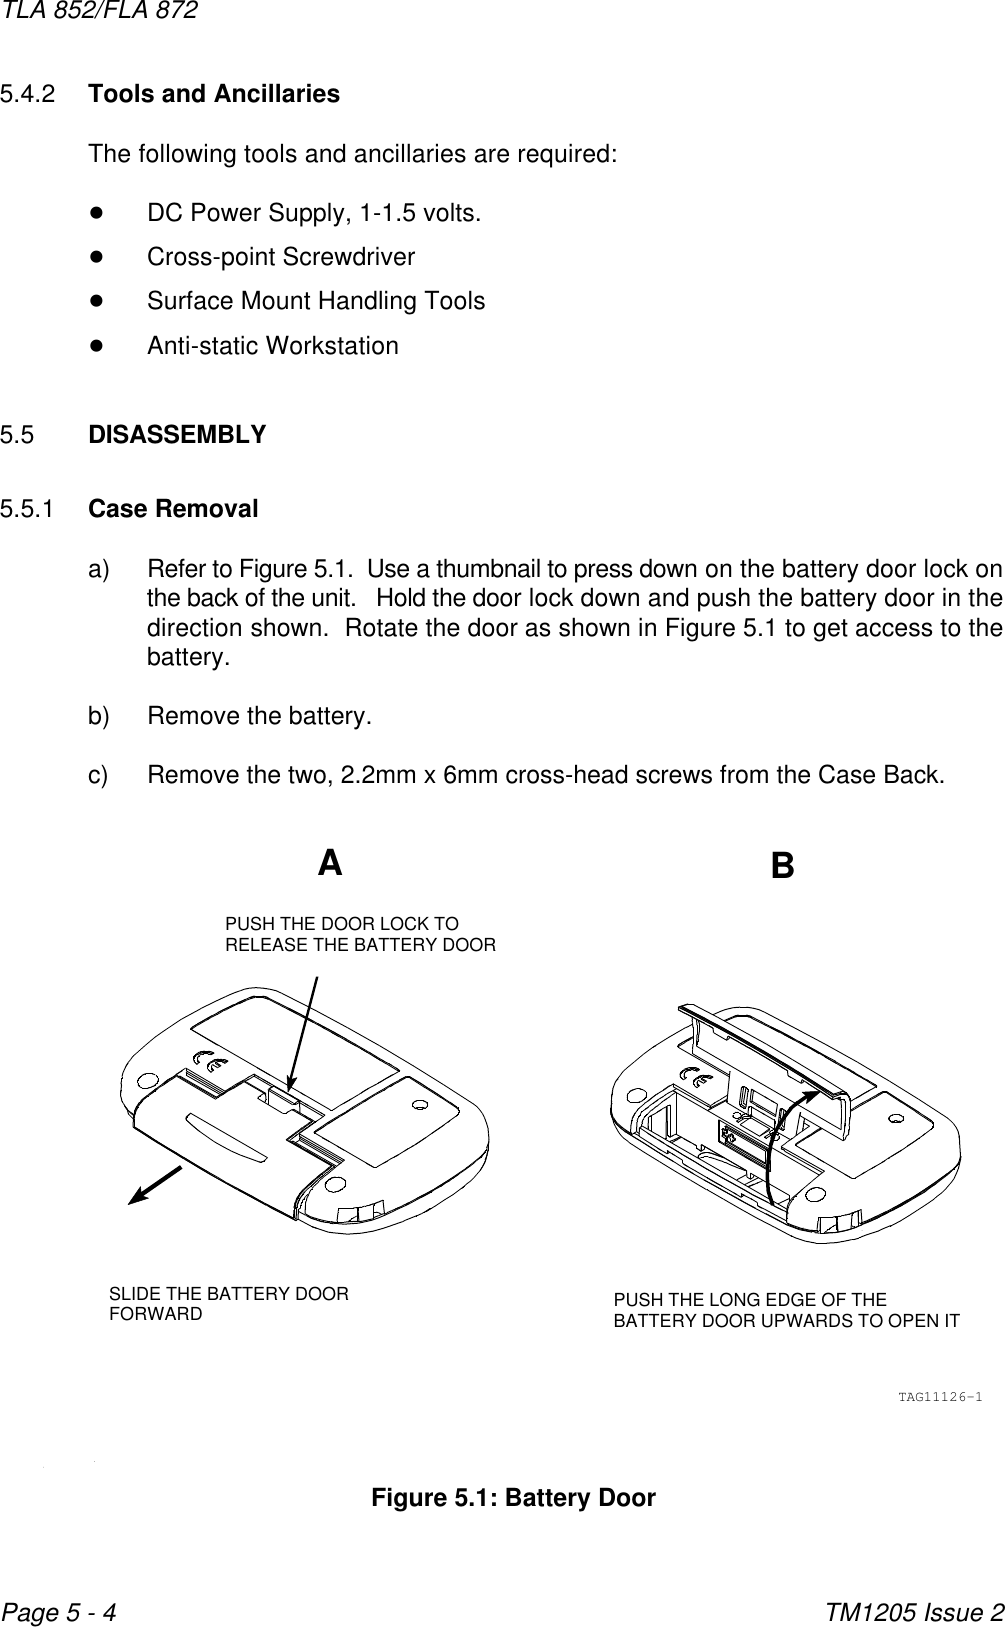 ABPUSH THE LONG EDGE OF THEBATTERY DOOR UPWARDS TO OPEN ITPUSH THE DOOR LOCK TORELEASE THE BATTERY DOORSLIDE THE BATTERY DOORFORWARDTAG11126-1TLA 852/FLA 872TM1205 Issue 2Page 5 - 4Figure 5.1: Battery Door5.4.2 Tools and AncillariesThe following tools and ancillaries are required:!DC Power Supply, 1-1.5 volts.!Cross-point Screwdriver!Surface Mount Handling Tools!Anti-static Workstation5.5 DISASSEMBLY5.5.1 Case Removala) Refer to Figure 5.1.  Use a thumbnail to press down on the battery door lock onthe back of the unit.   Hold the door lock down and push the battery door in thedirection shown.  Rotate the door as shown in Figure 5.1 to get access to thebattery.b) Remove the battery.c) Remove the two, 2.2mm x 6mm cross-head screws from the Case Back.